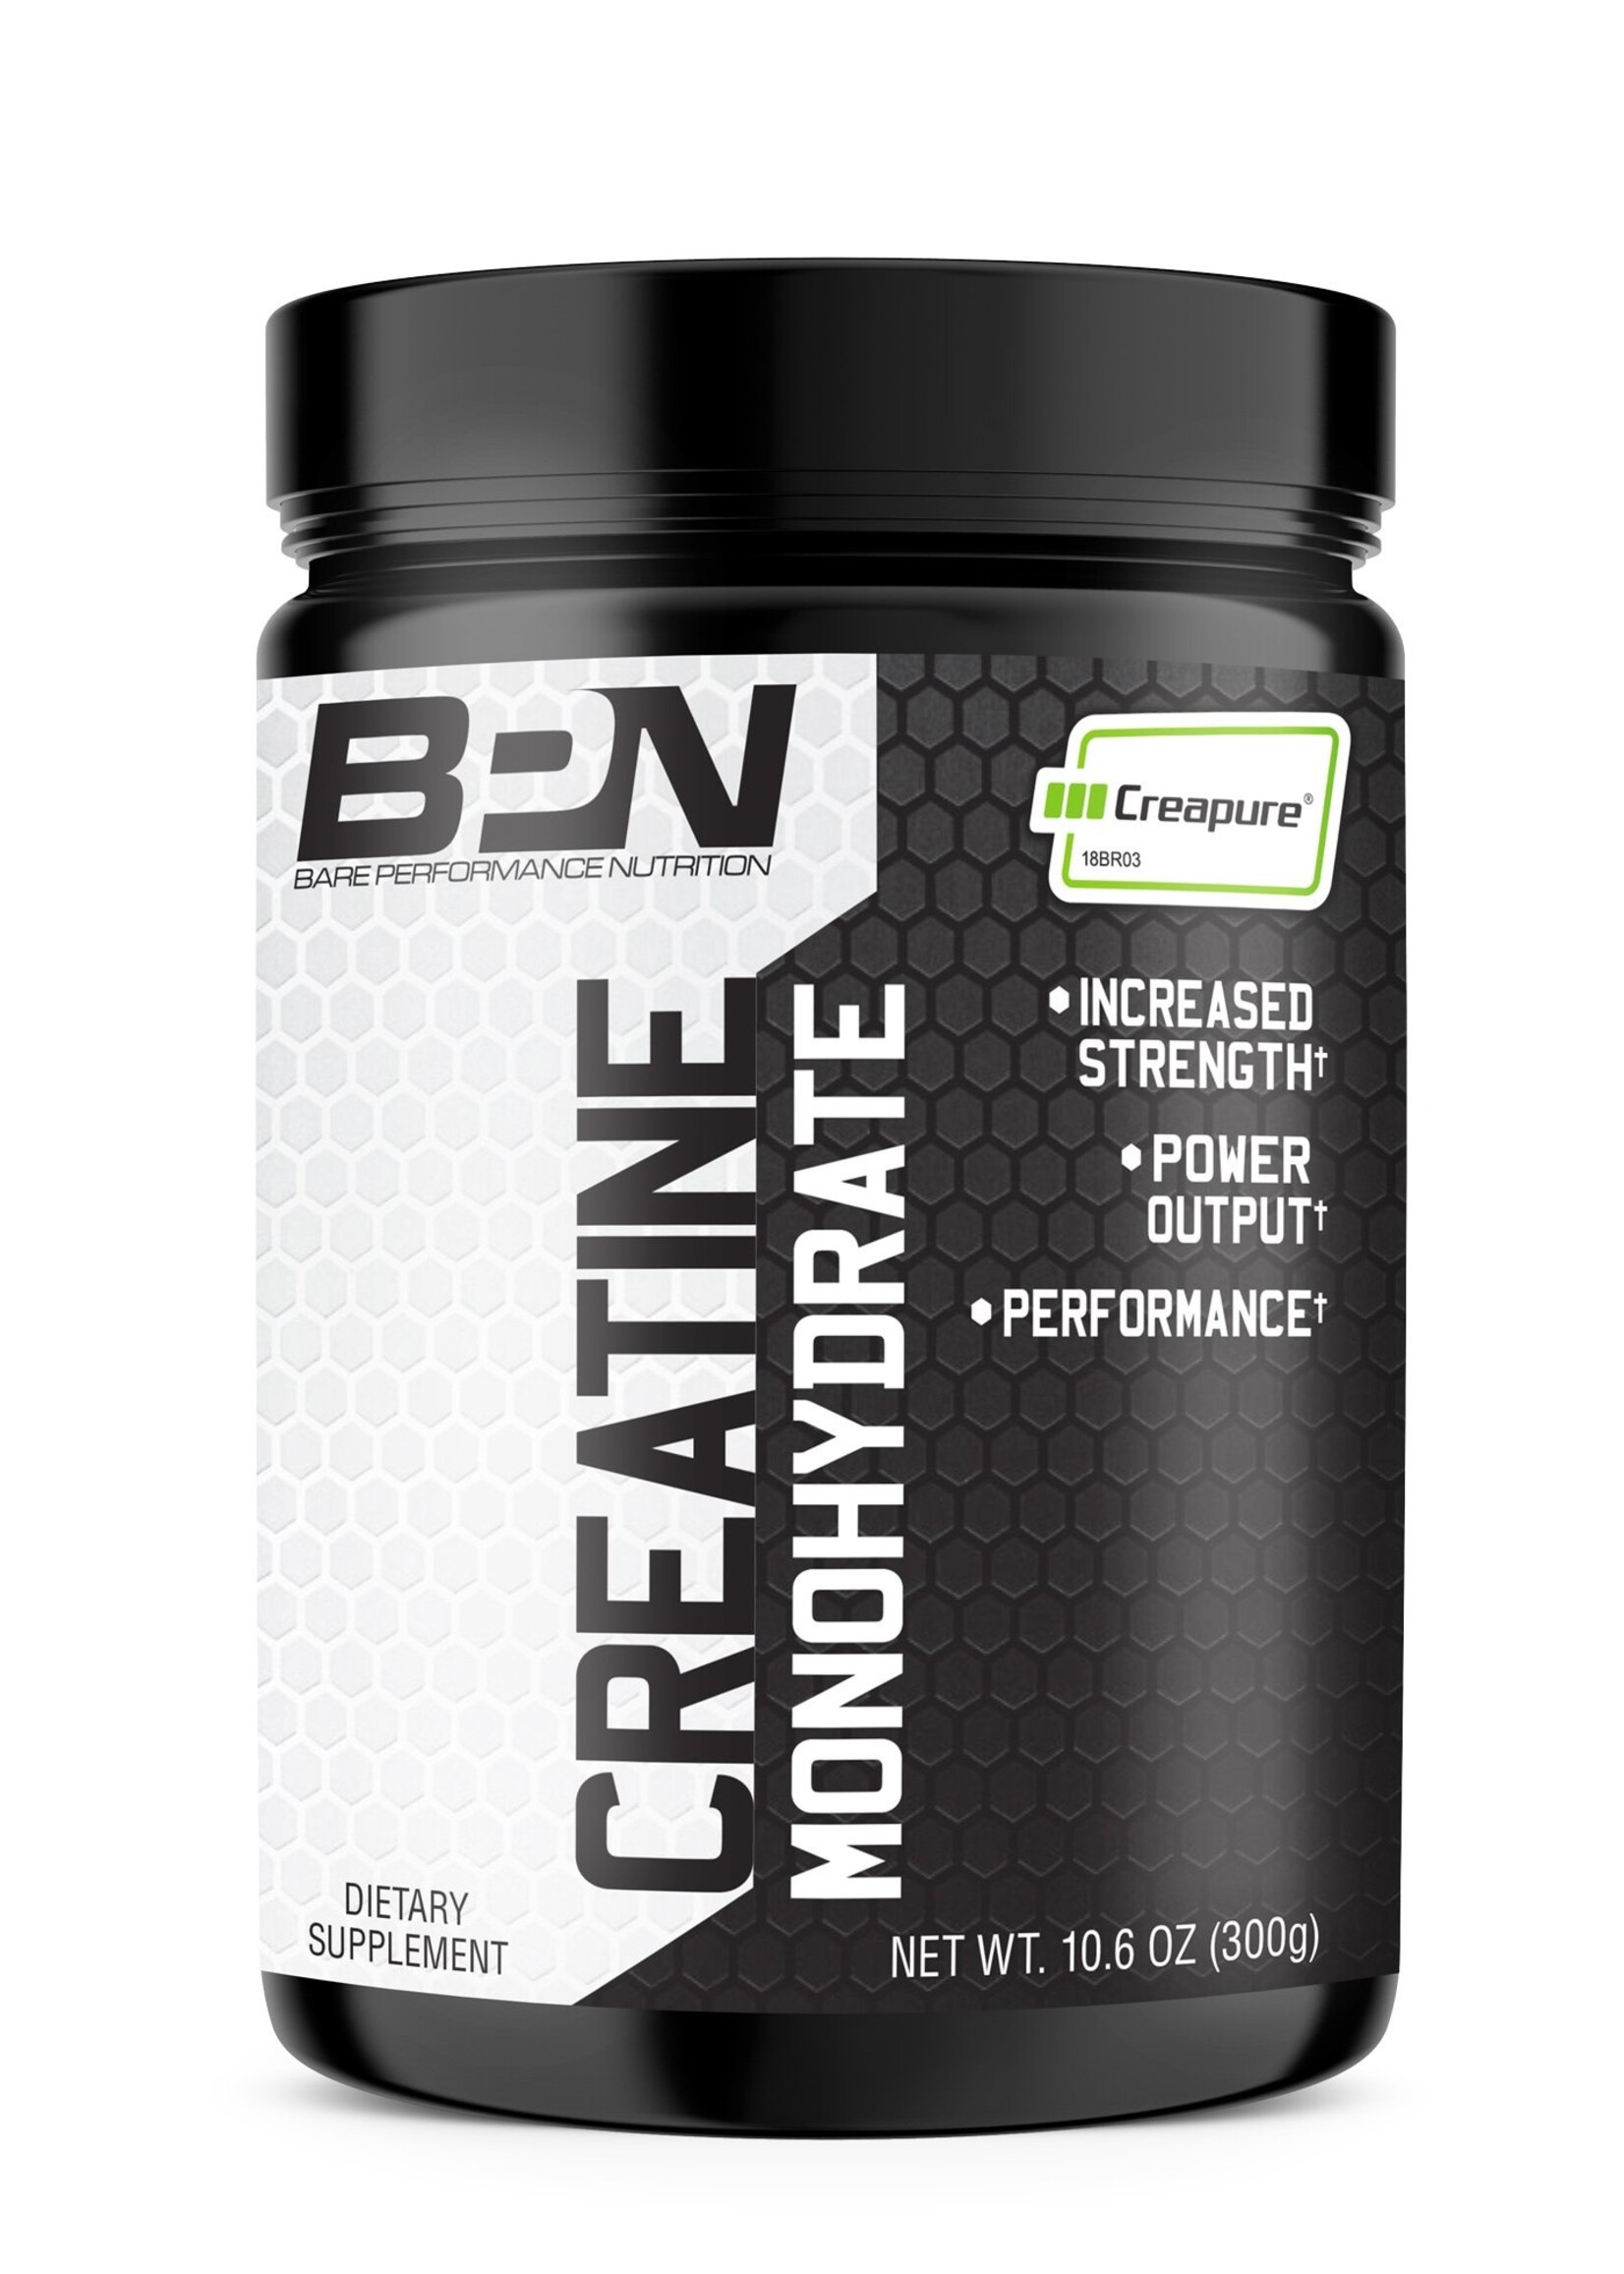 Bare Performance Nutrition BPN Creatine Monohydrate (60 servings)